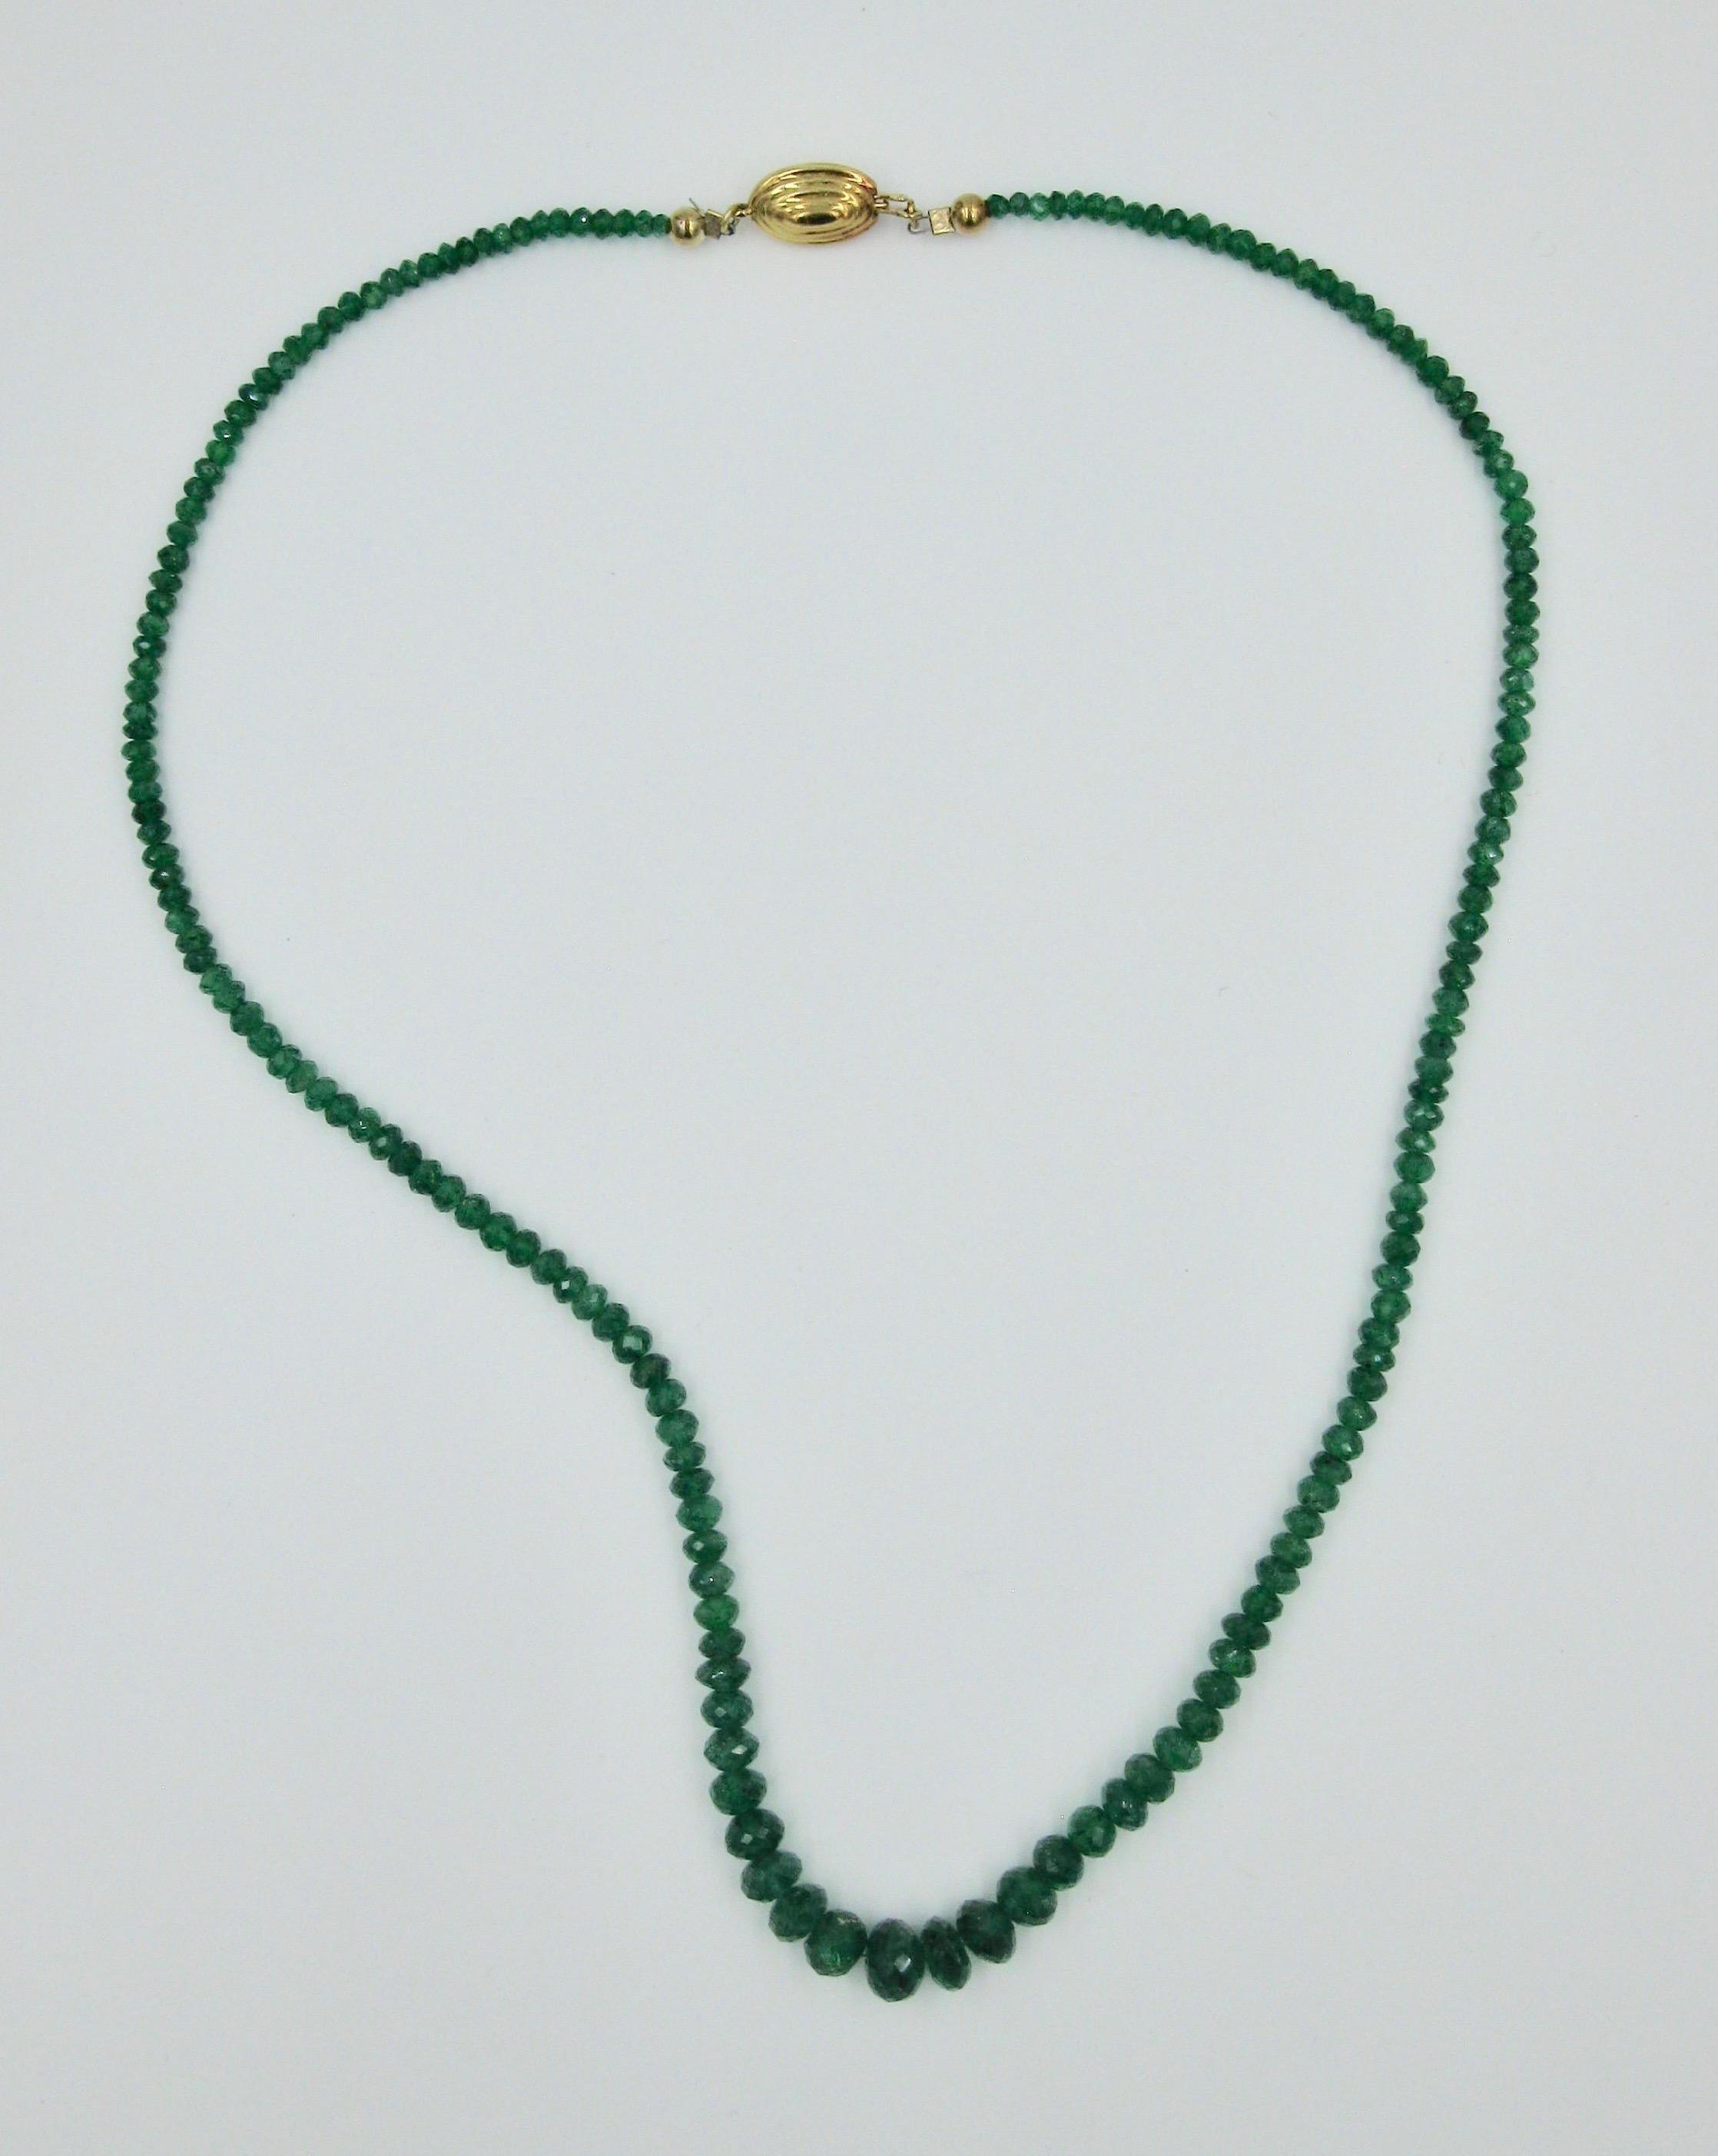 Emerald 14 Karat Gold Necklace Graduated Faceted Natural Mined Emerald 4